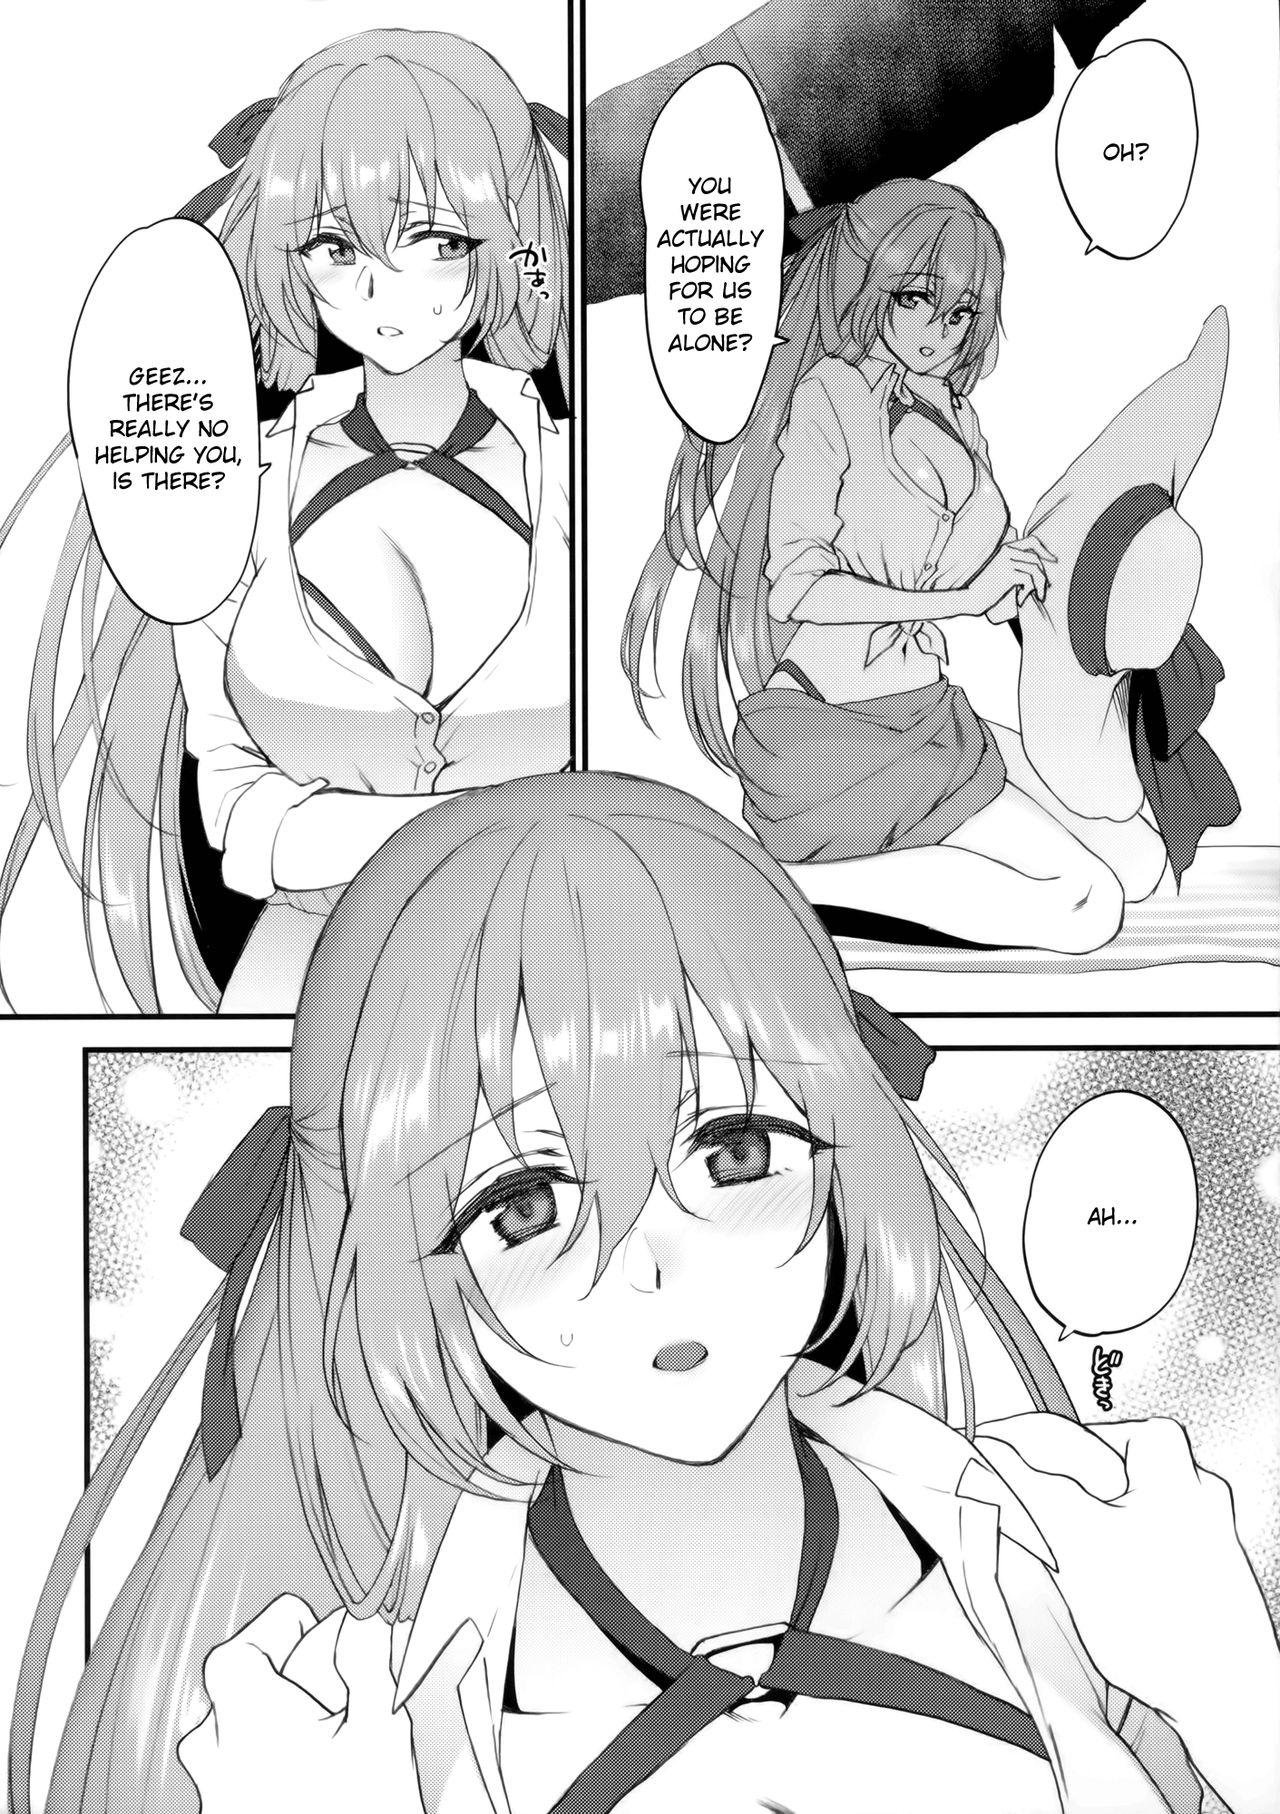 Free 18 Year Old Porn Summer Escape - Girls frontline Caliente - Page 5